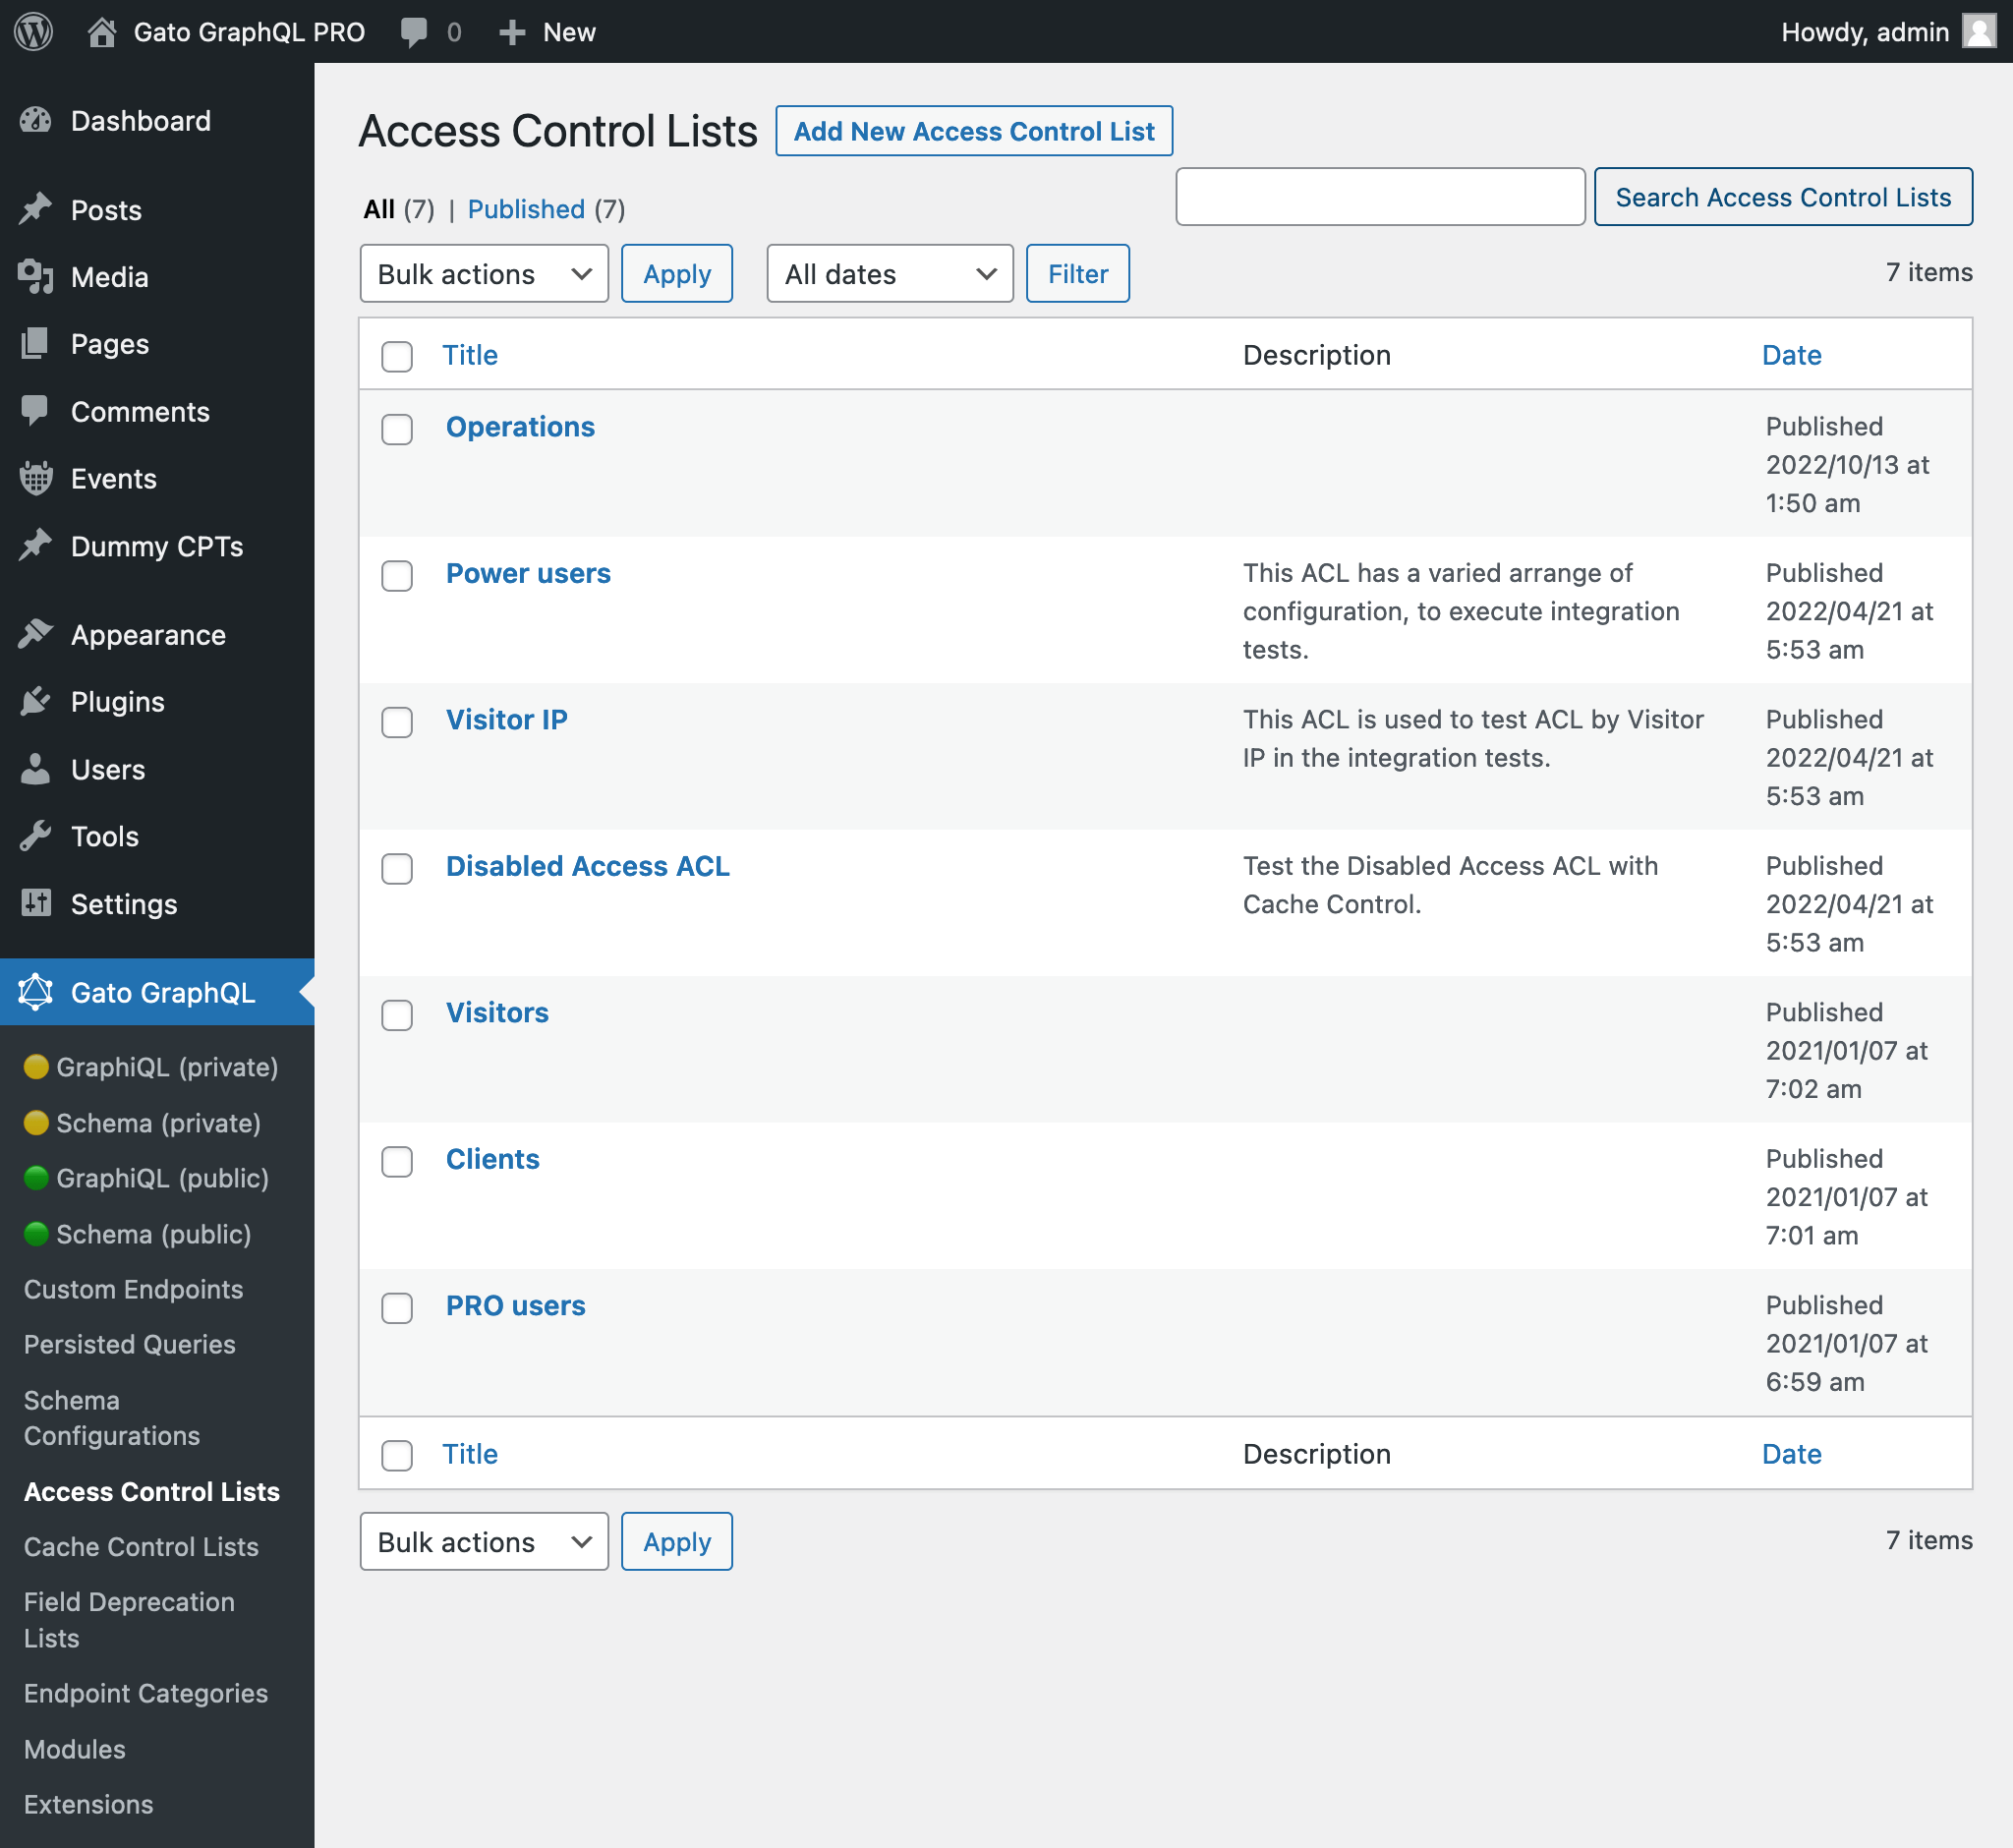 Access Control Lists in the admin